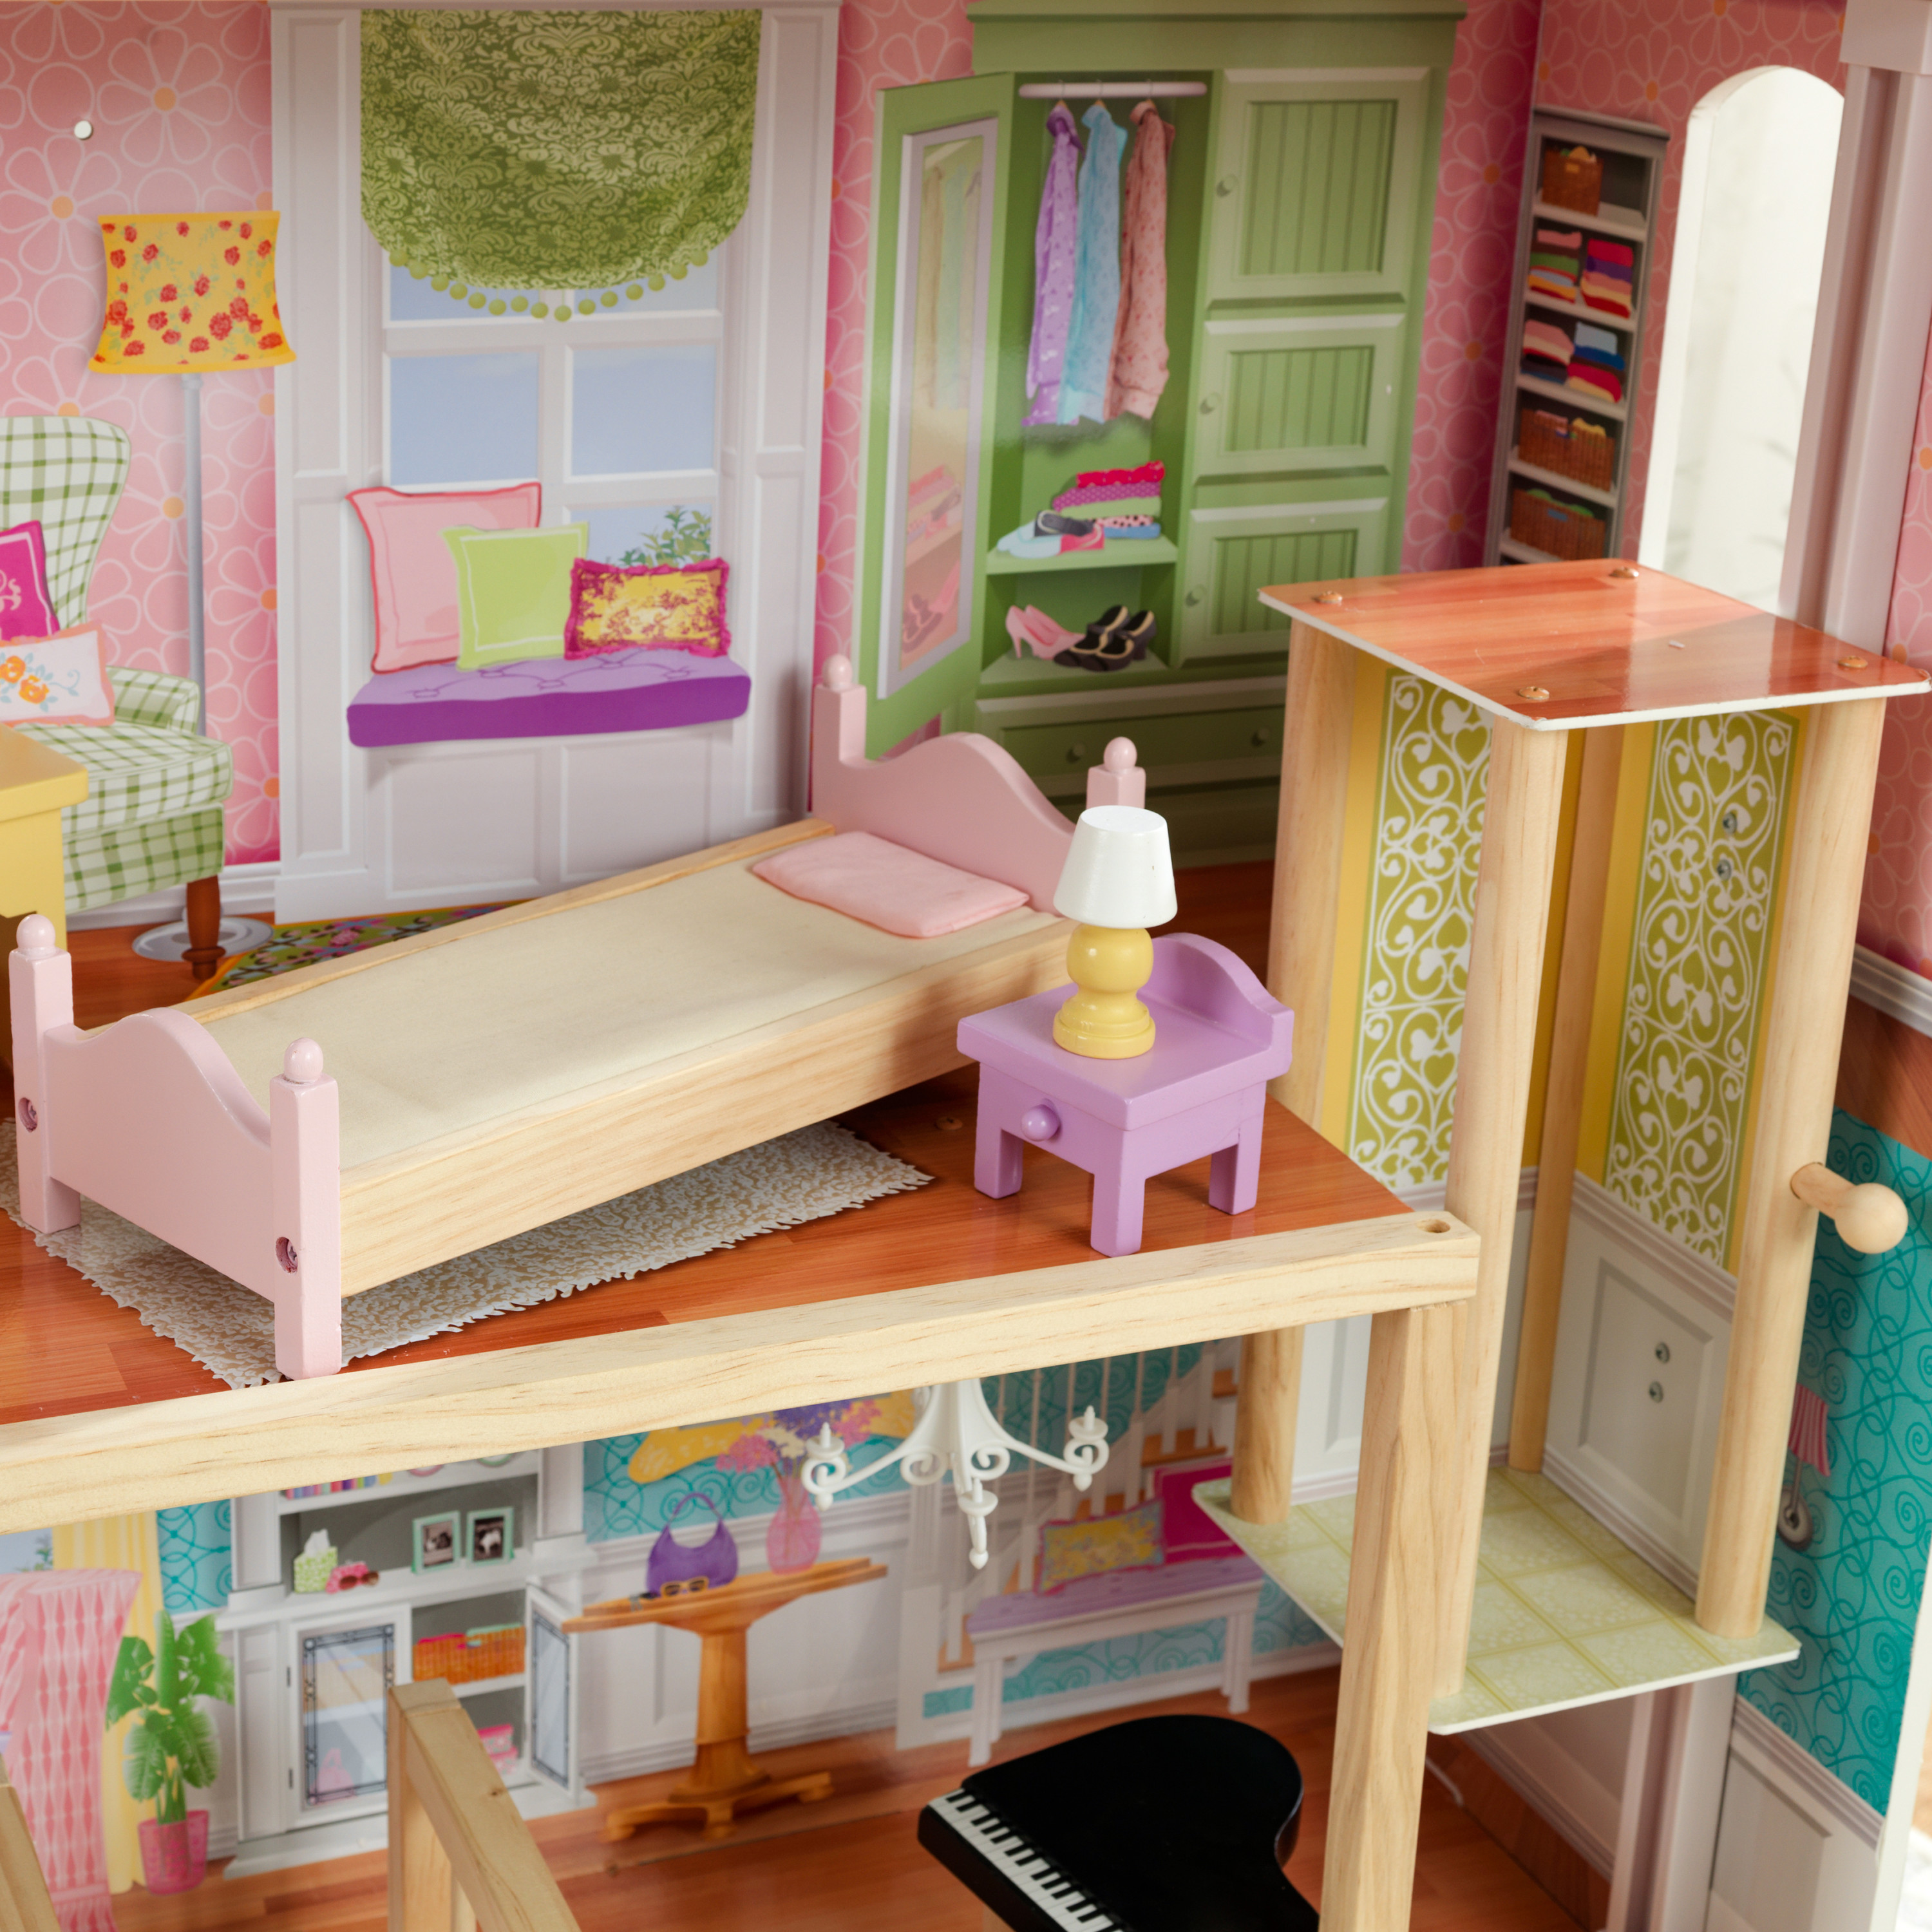 KidKraft Grand View Mansion Wooden Dollhouse with 34 Accessories, Ages 3 and up - image 4 of 14